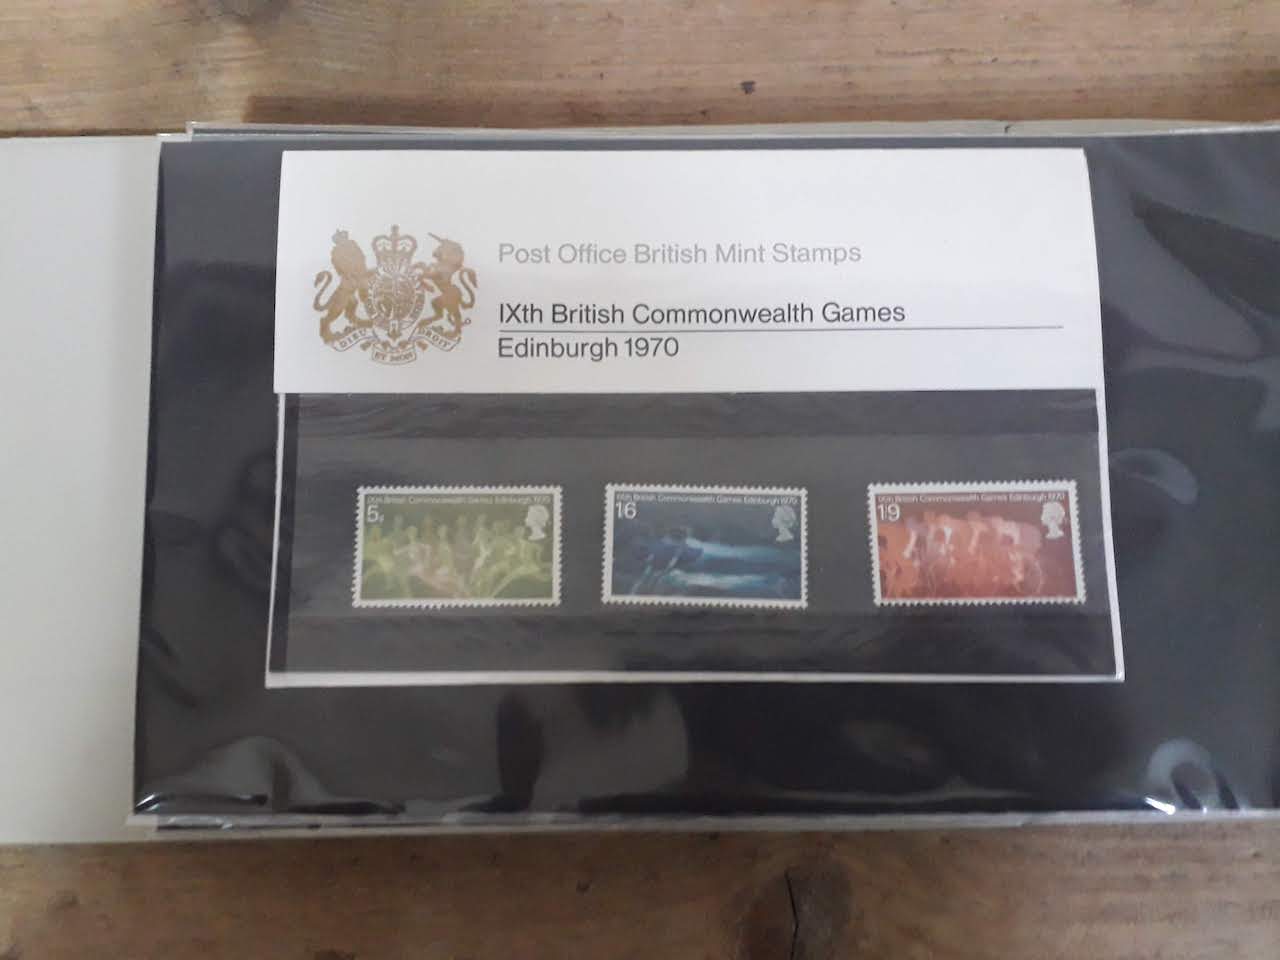 GB British Post Office mint stamp packs, 4 albums, circa 1970s, some high value, collectors packs, - Image 43 of 46